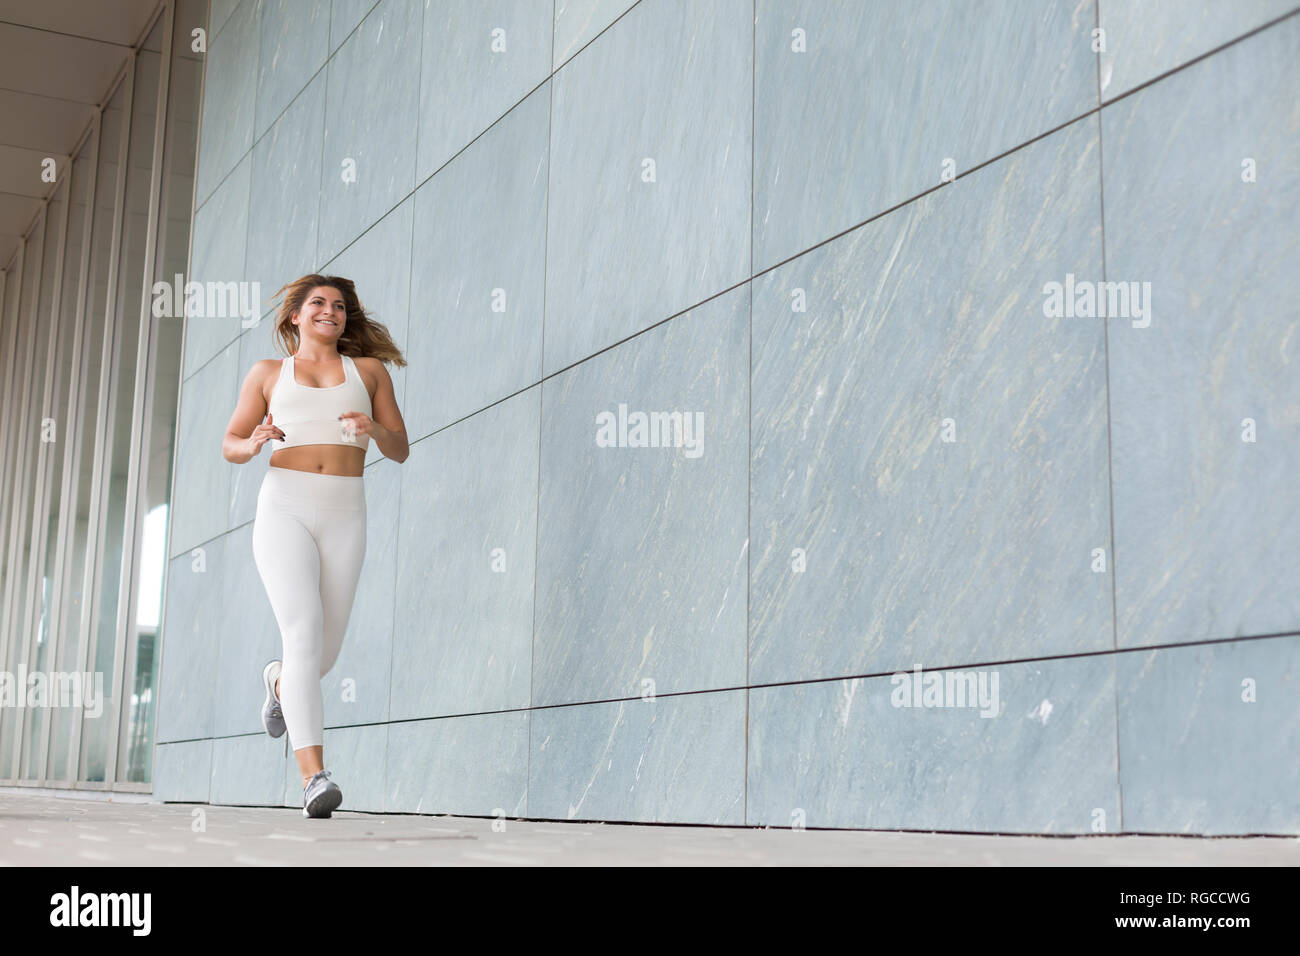 Jogging young woman dressed in white Stock Photo